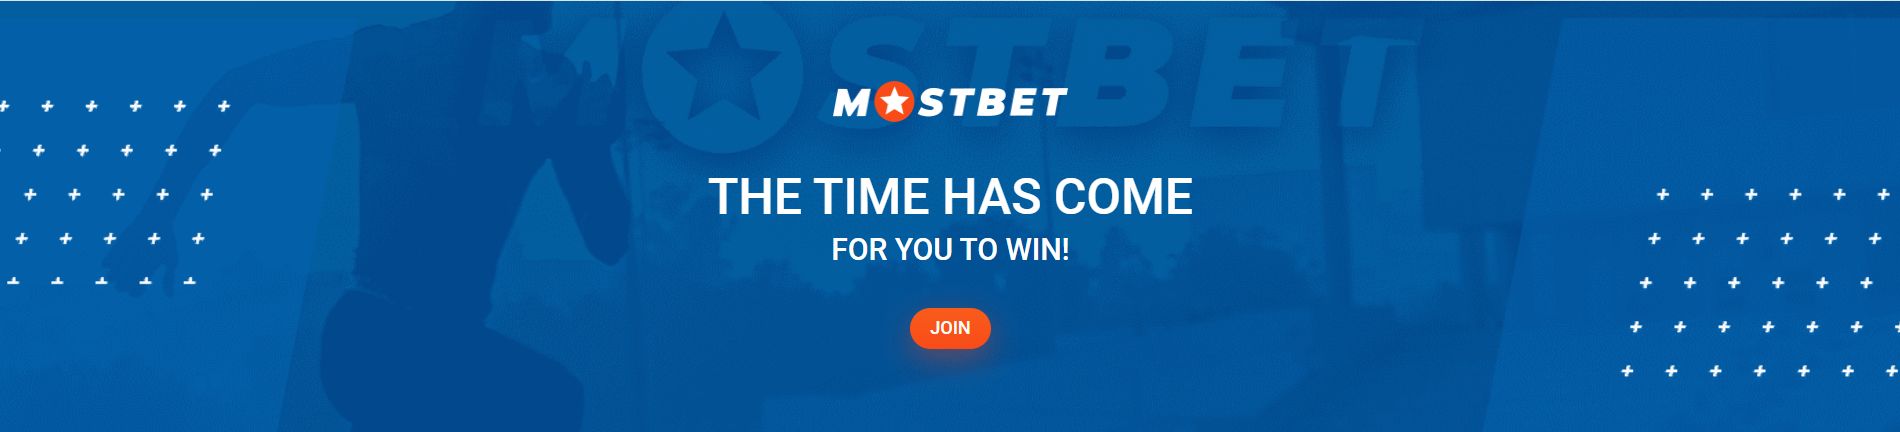 online mostbet.in reviews